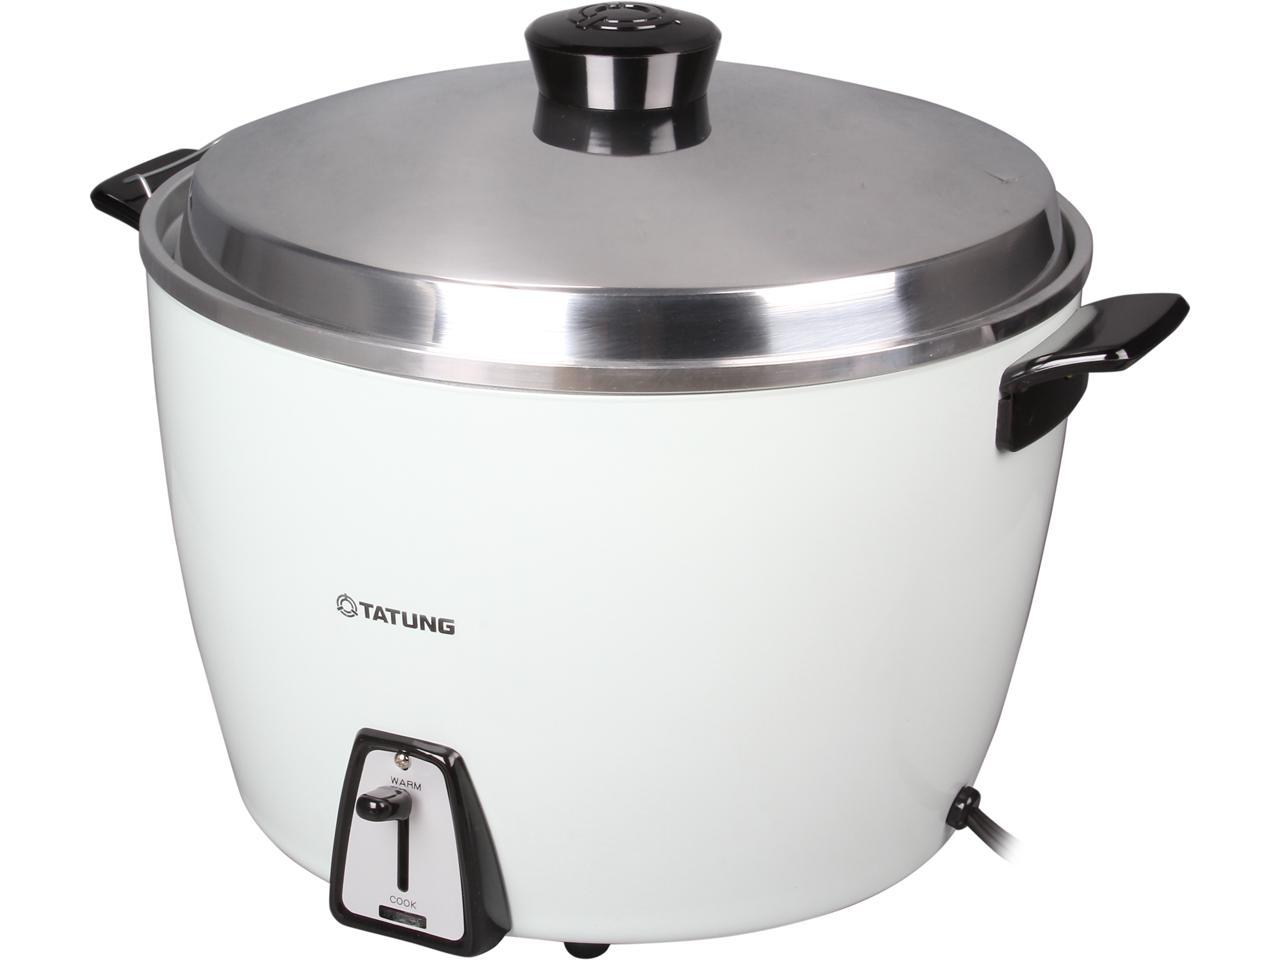 TATUNG TAC-20 White 20 Cup Rice Cooker - Newegg.com 20 Cup Rice Cooker With Stainless Steel Inner Pot